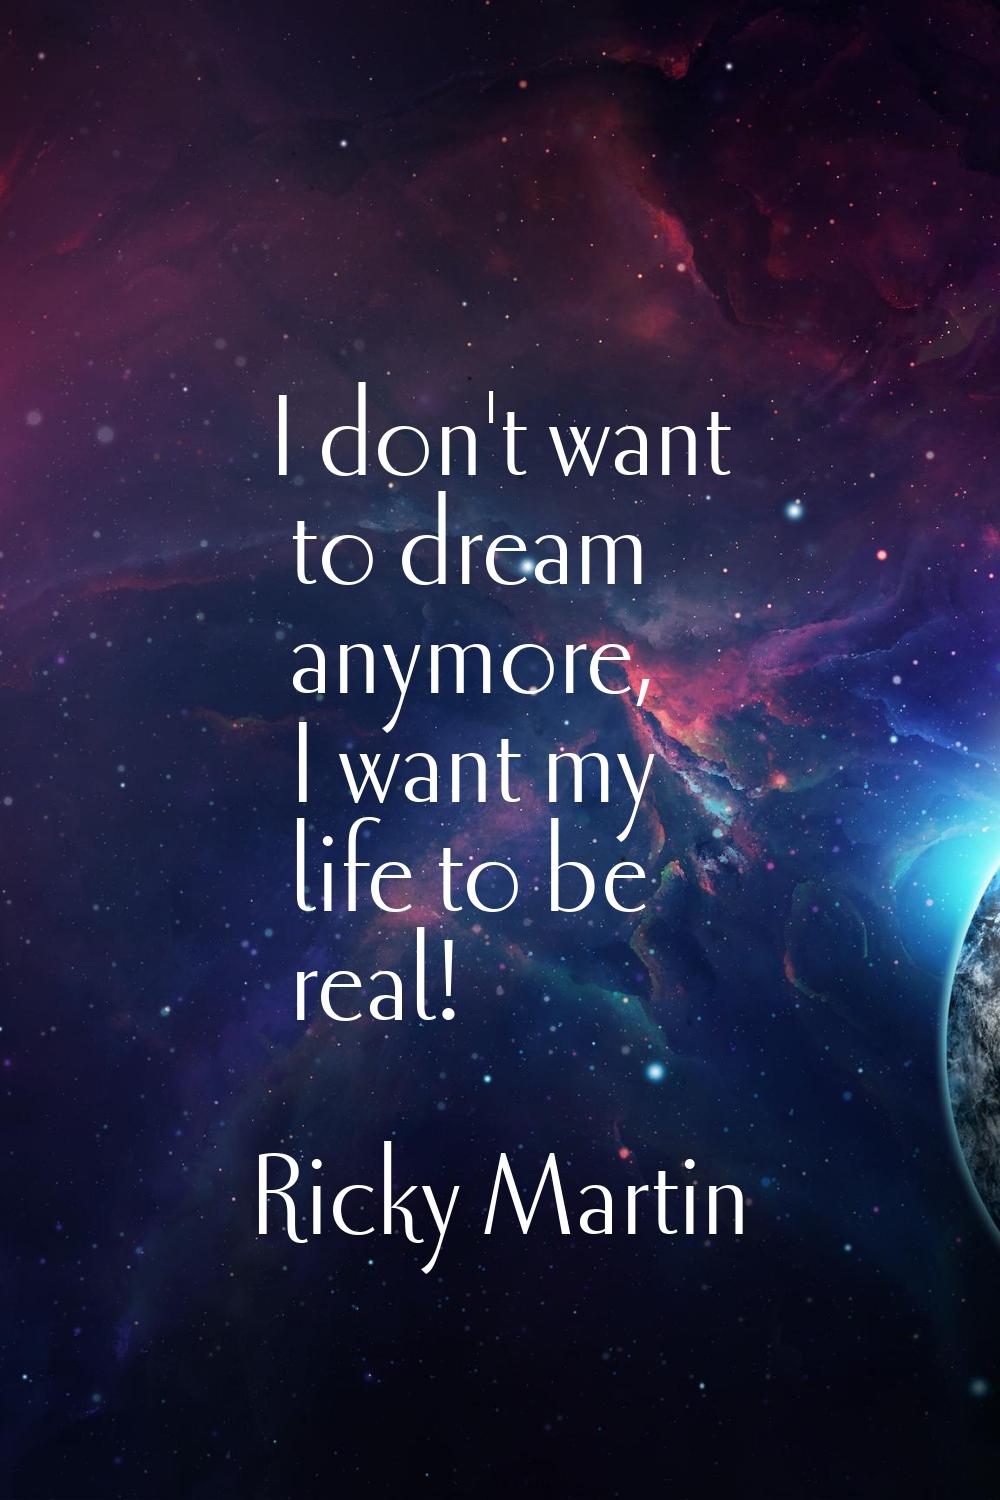 I don't want to dream anymore, I want my life to be real!